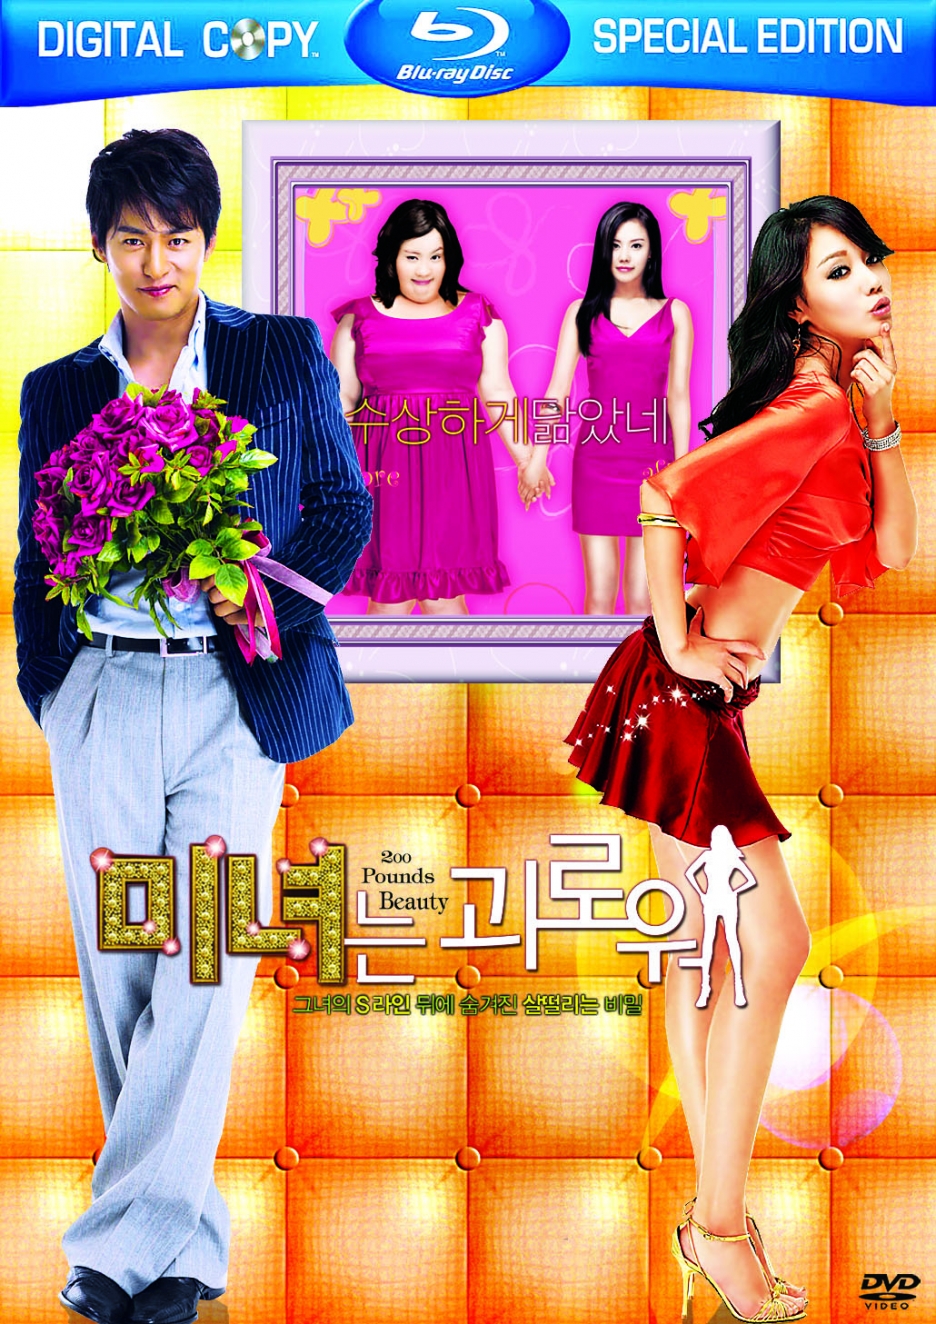 936full-200-pounds-beauty-poster